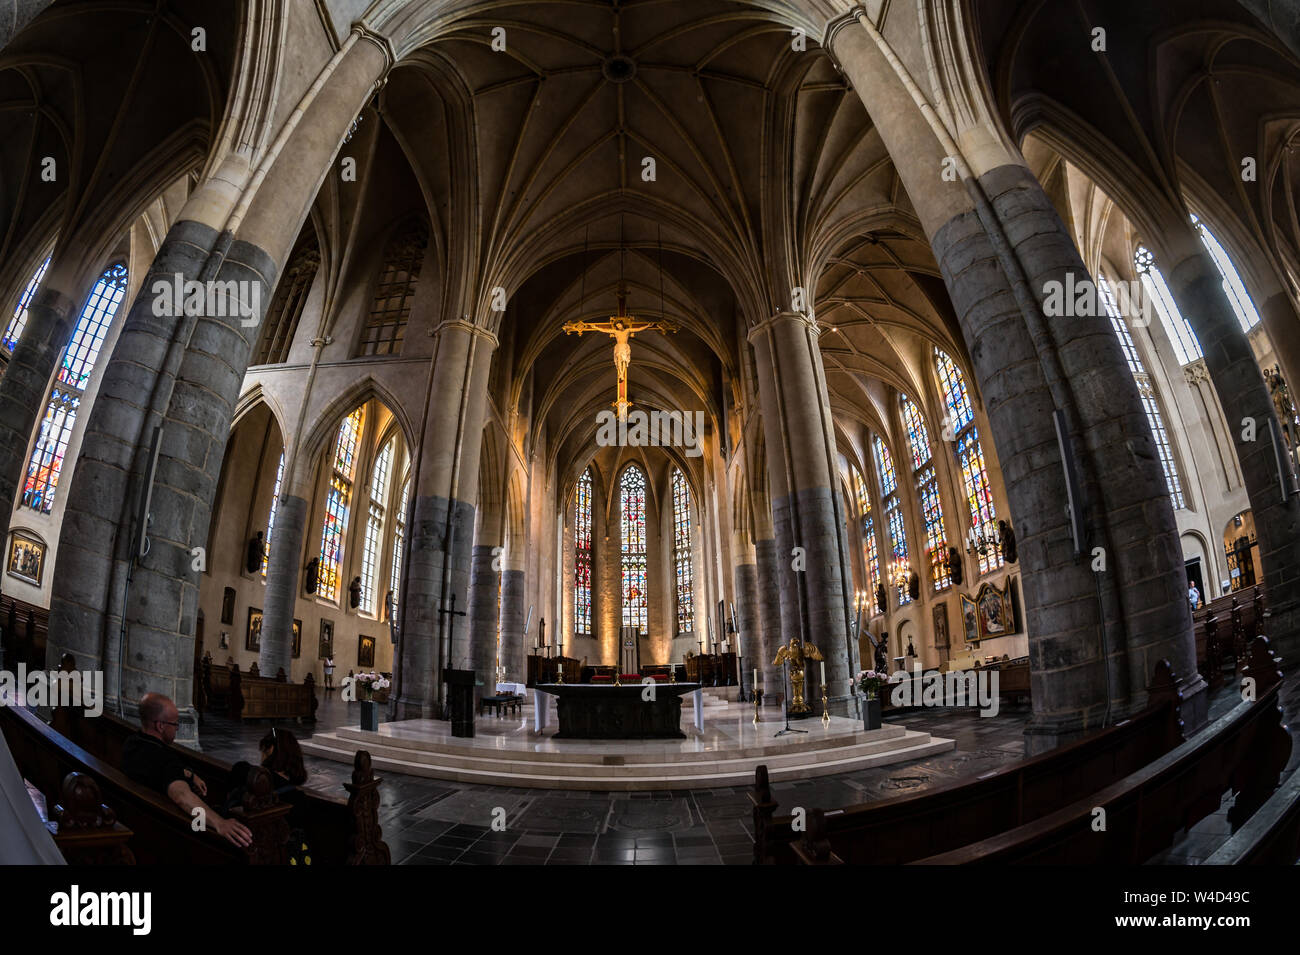 Interior of St Christopher's Cathedral, Roermond, Limburg province, Netherlands Stock Photo